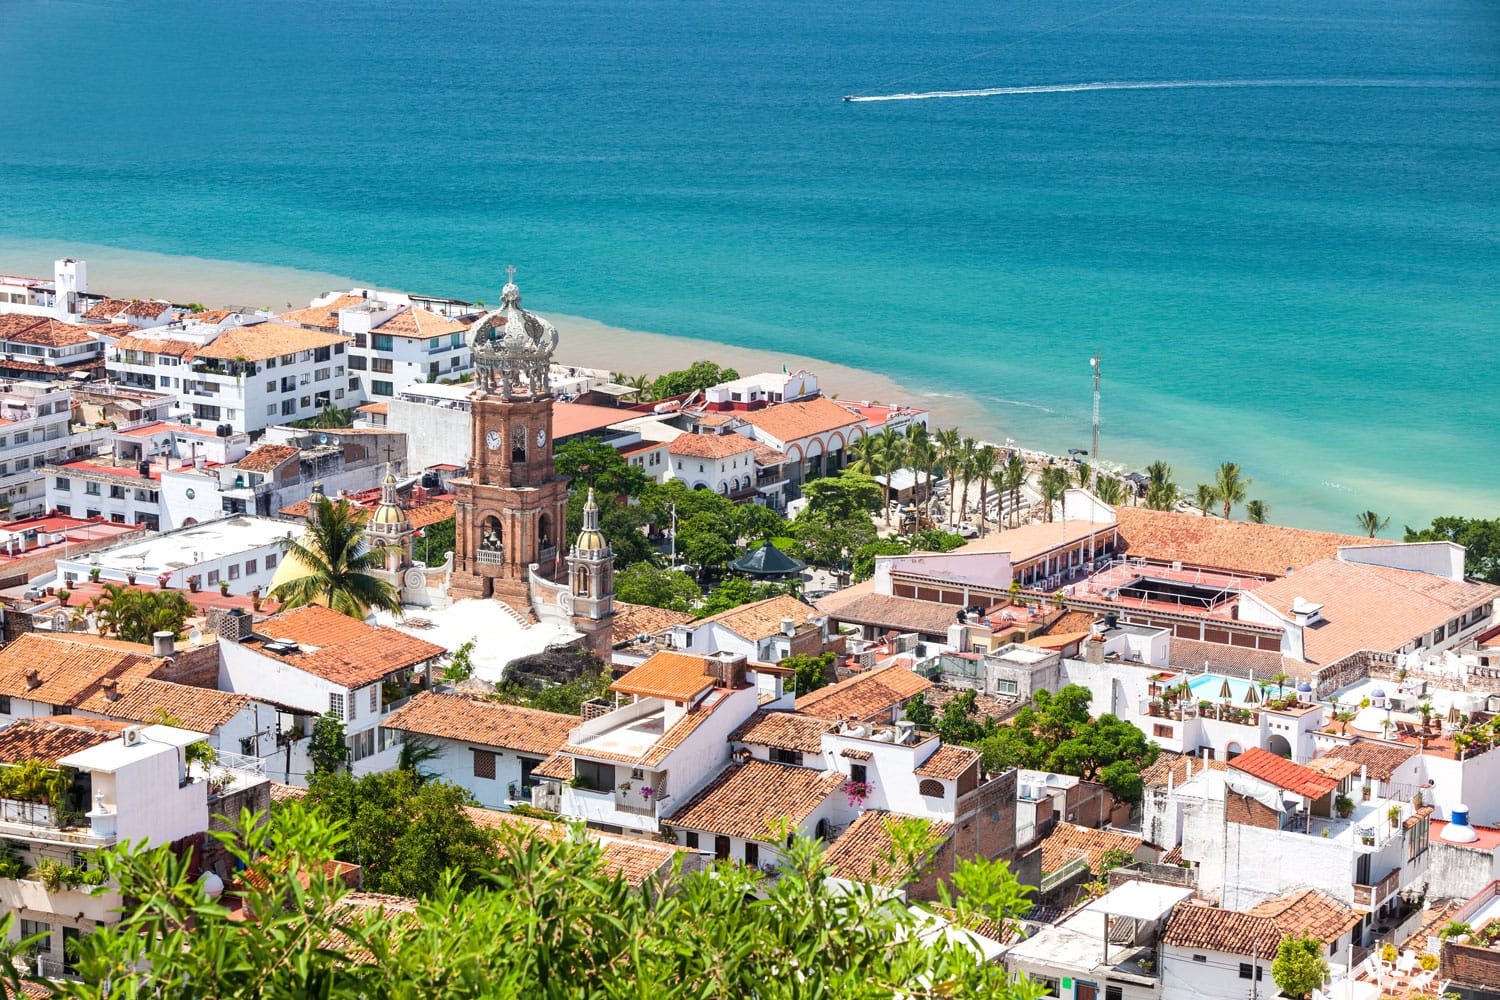 Panoramic view of downtown Puerto Vallarta in Mexico